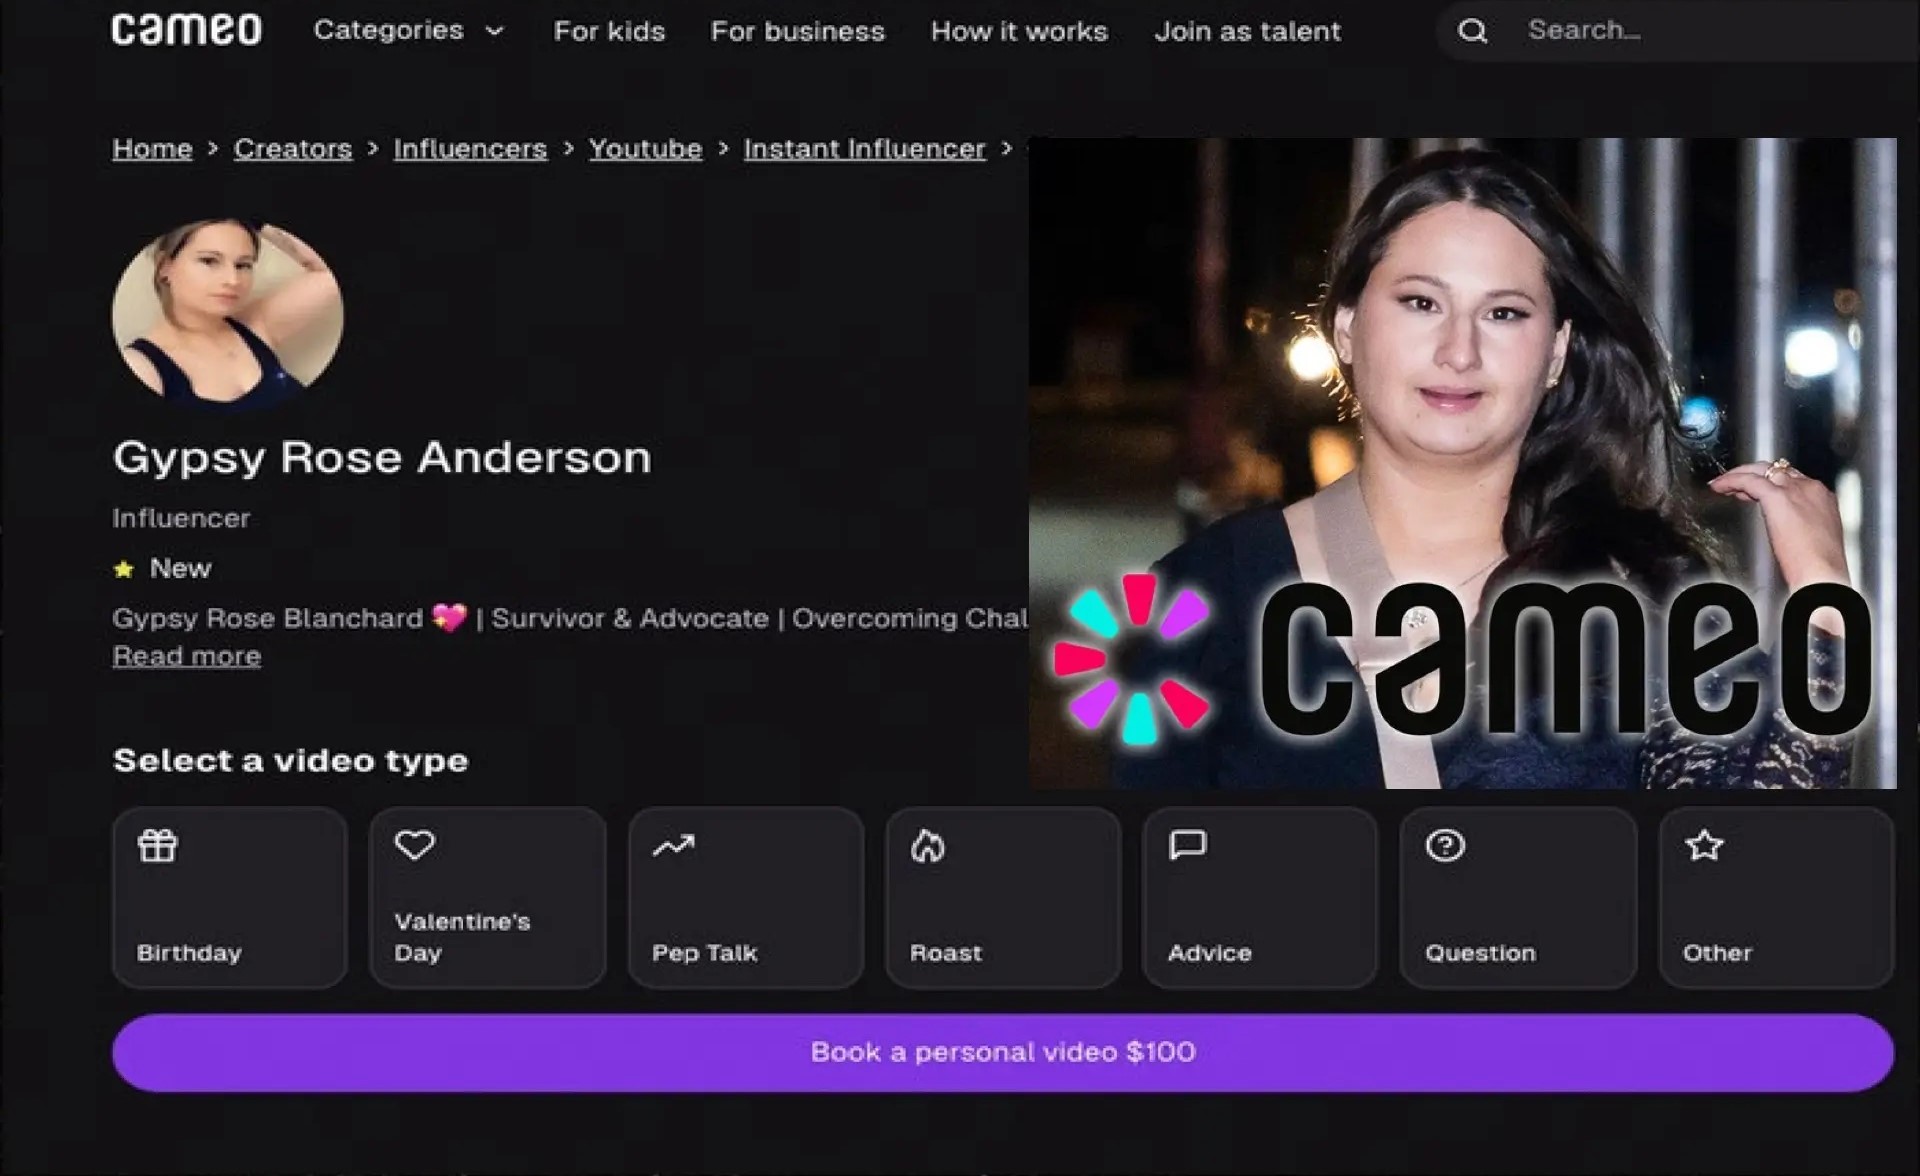 Gypsy Rose Blanchard Offers Personalized Videos On Cameo For $100